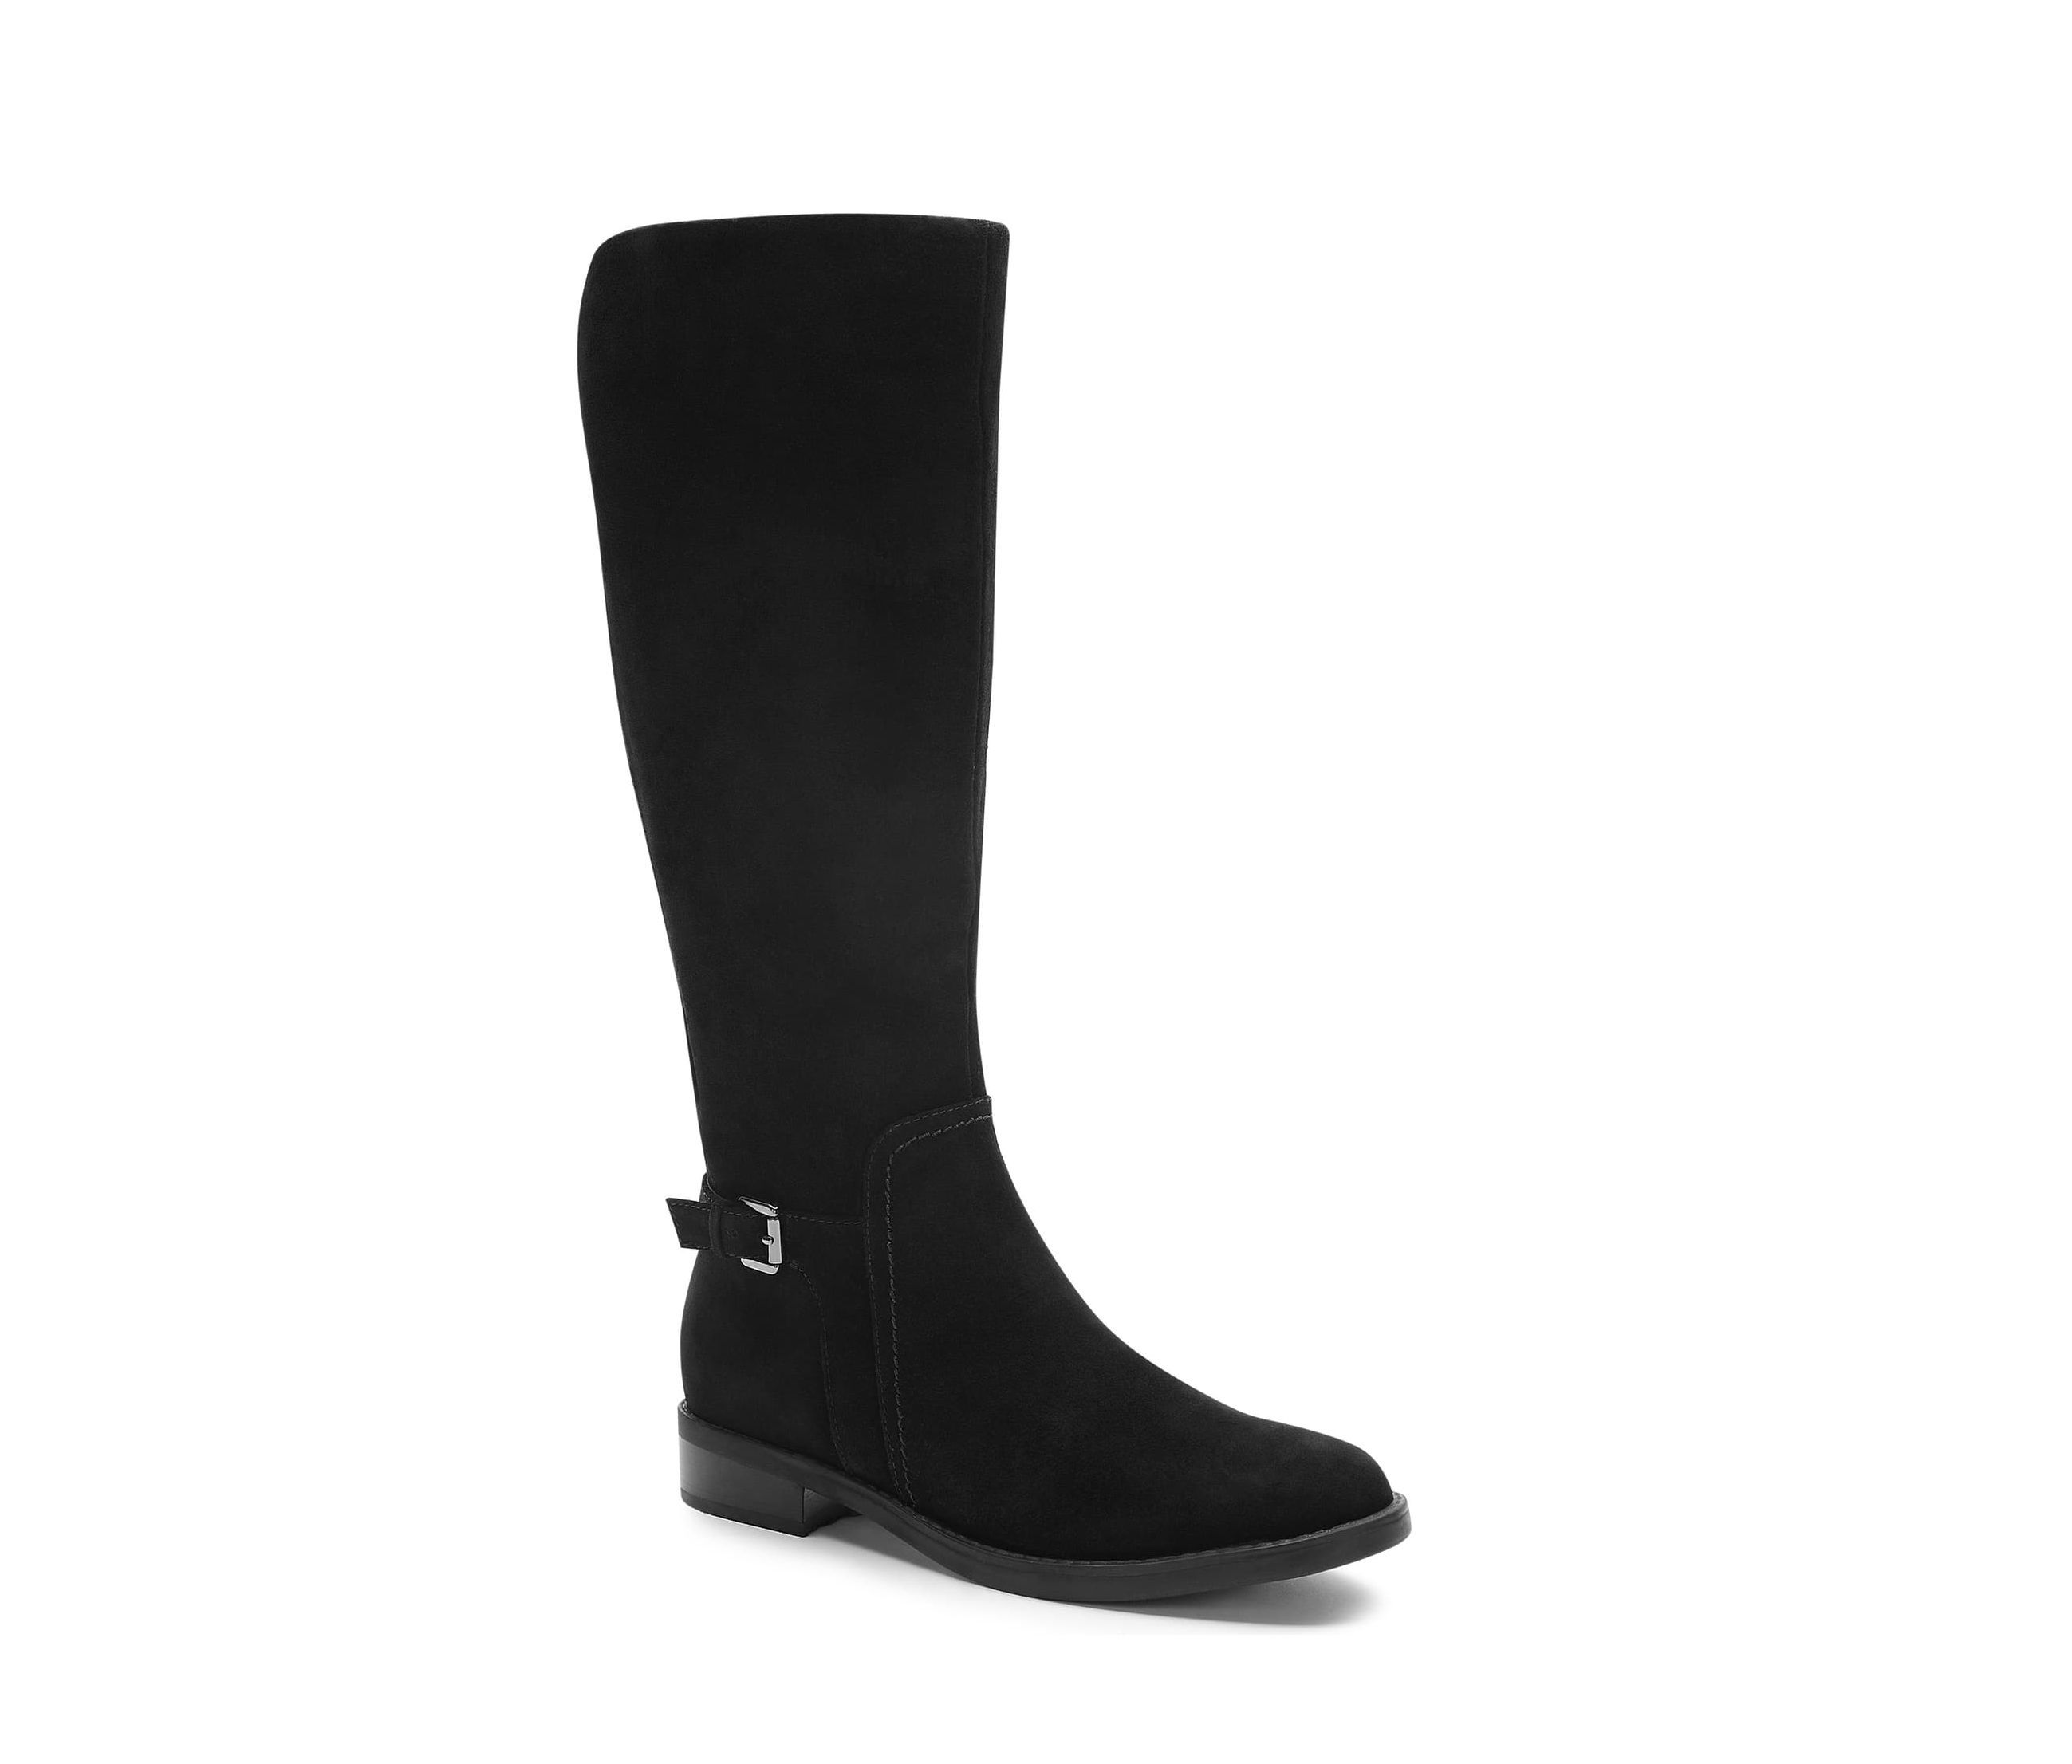 women's boots with good arch support